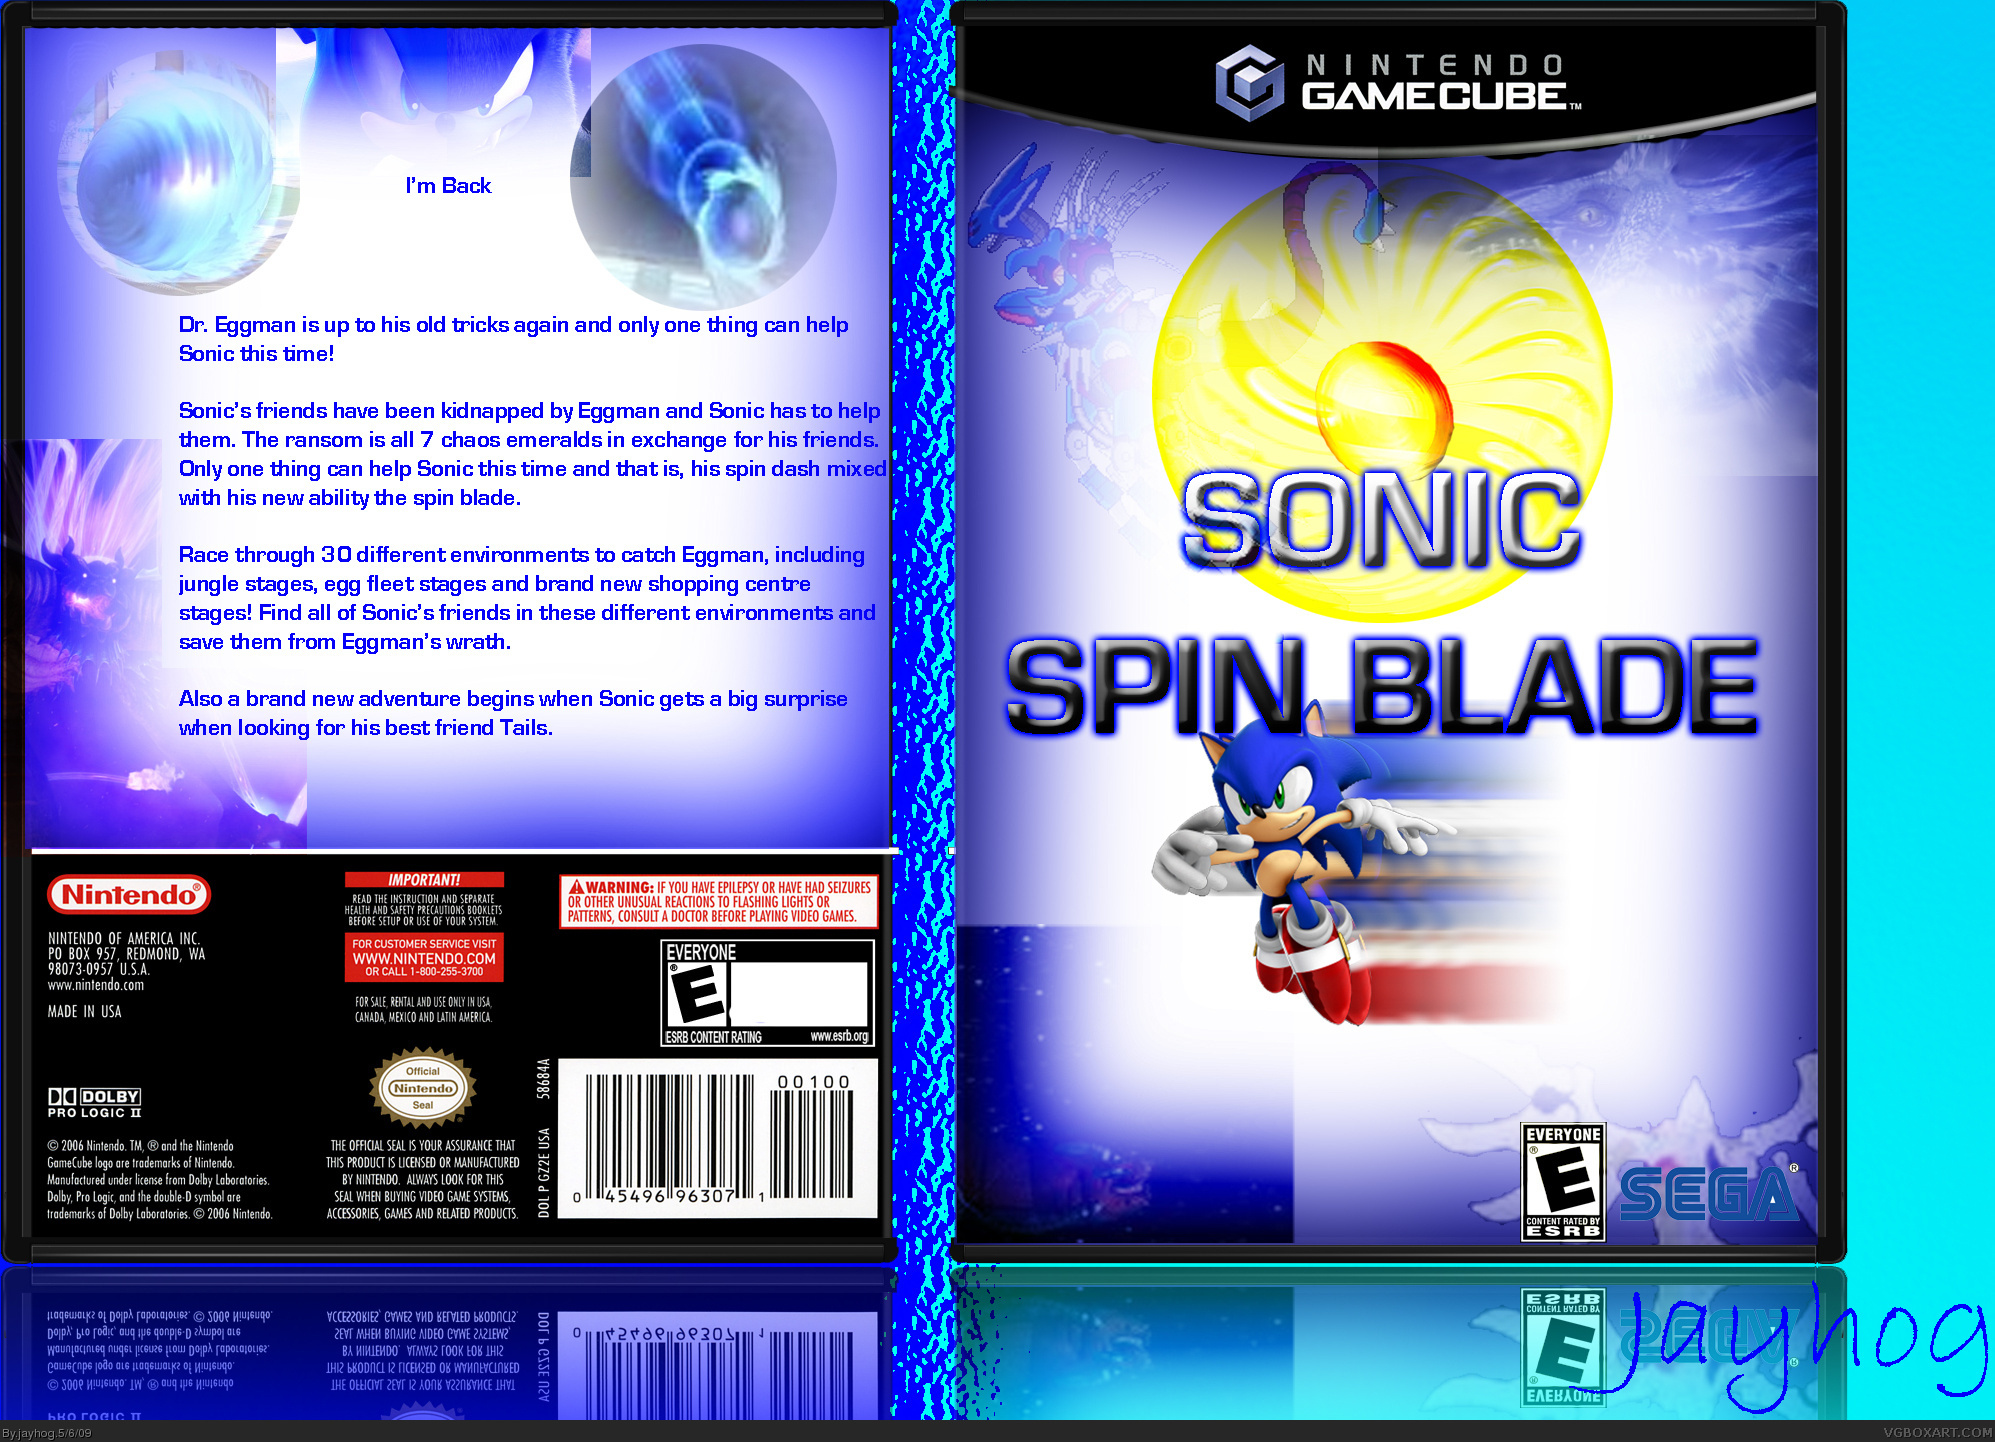 Sonic Spin Blade box cover